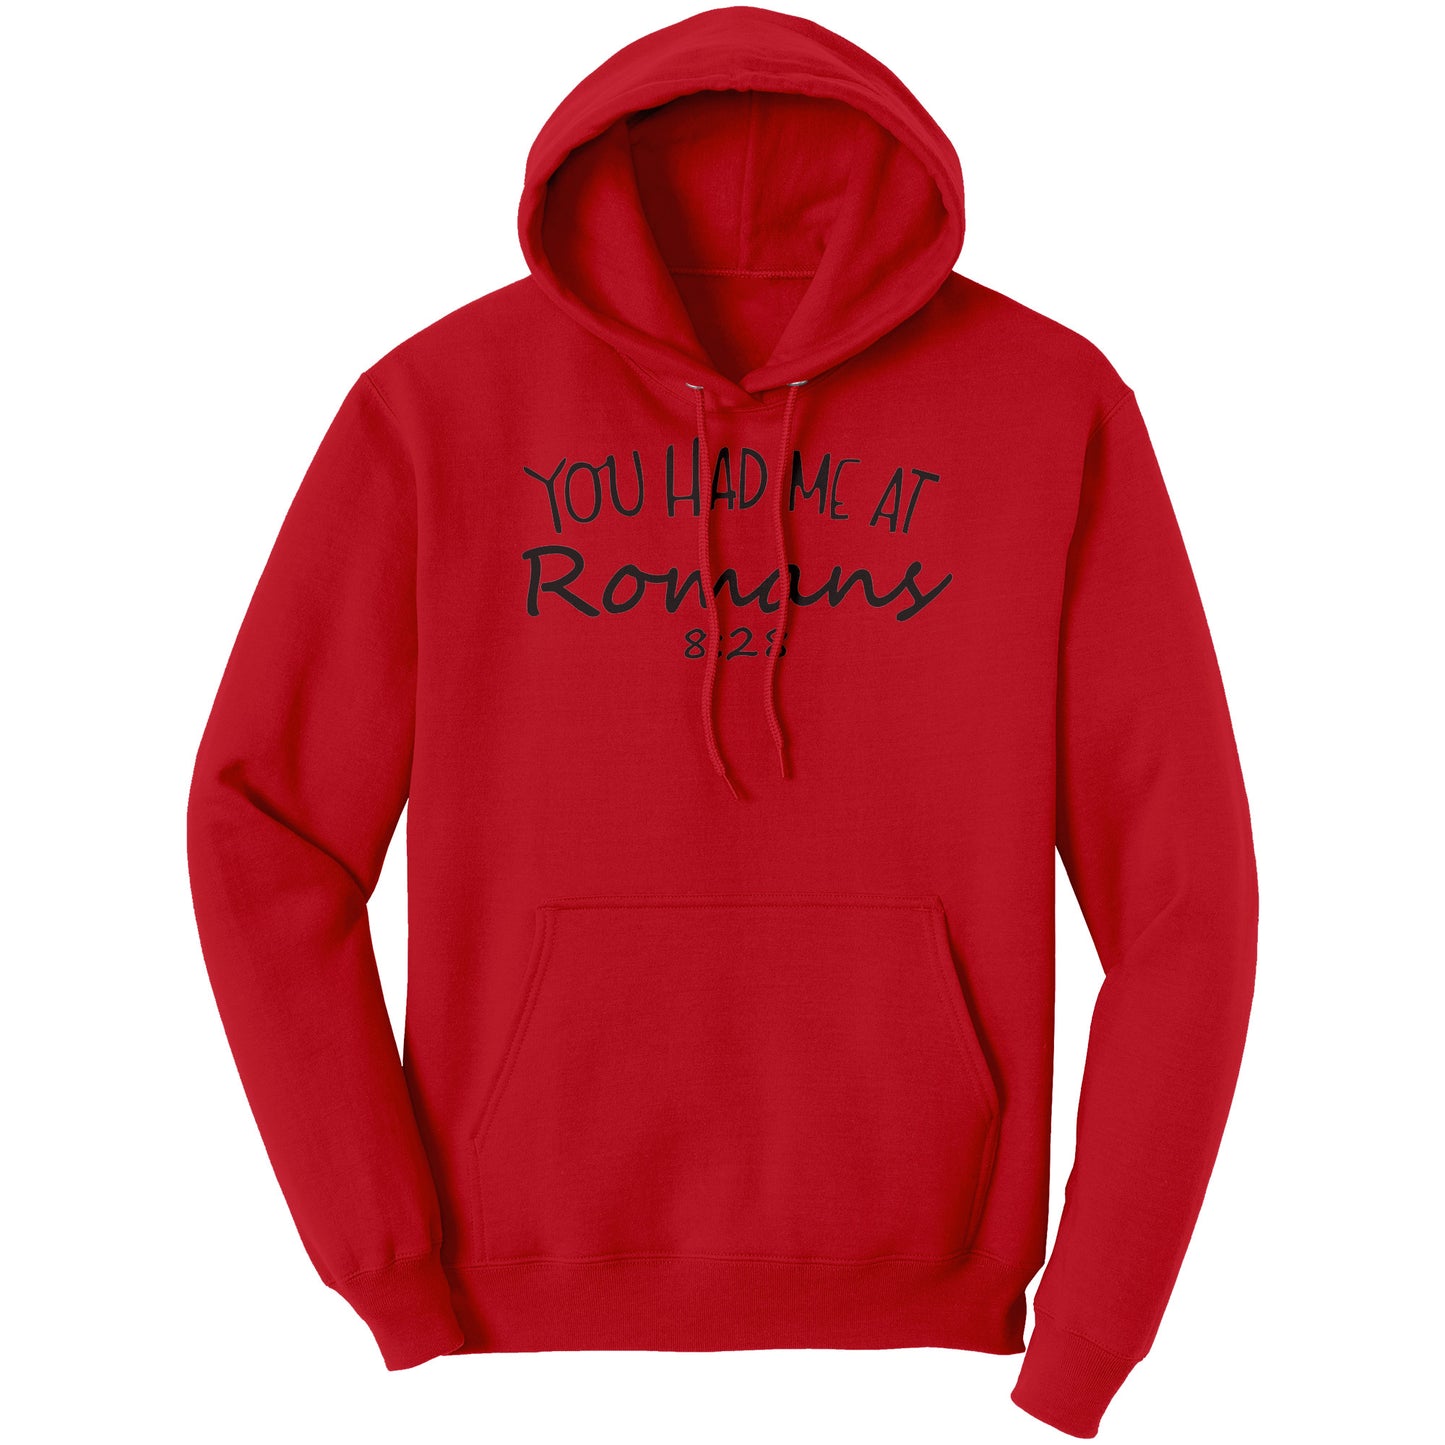 You Had me At Romans 8:28 Hoodie Part 1